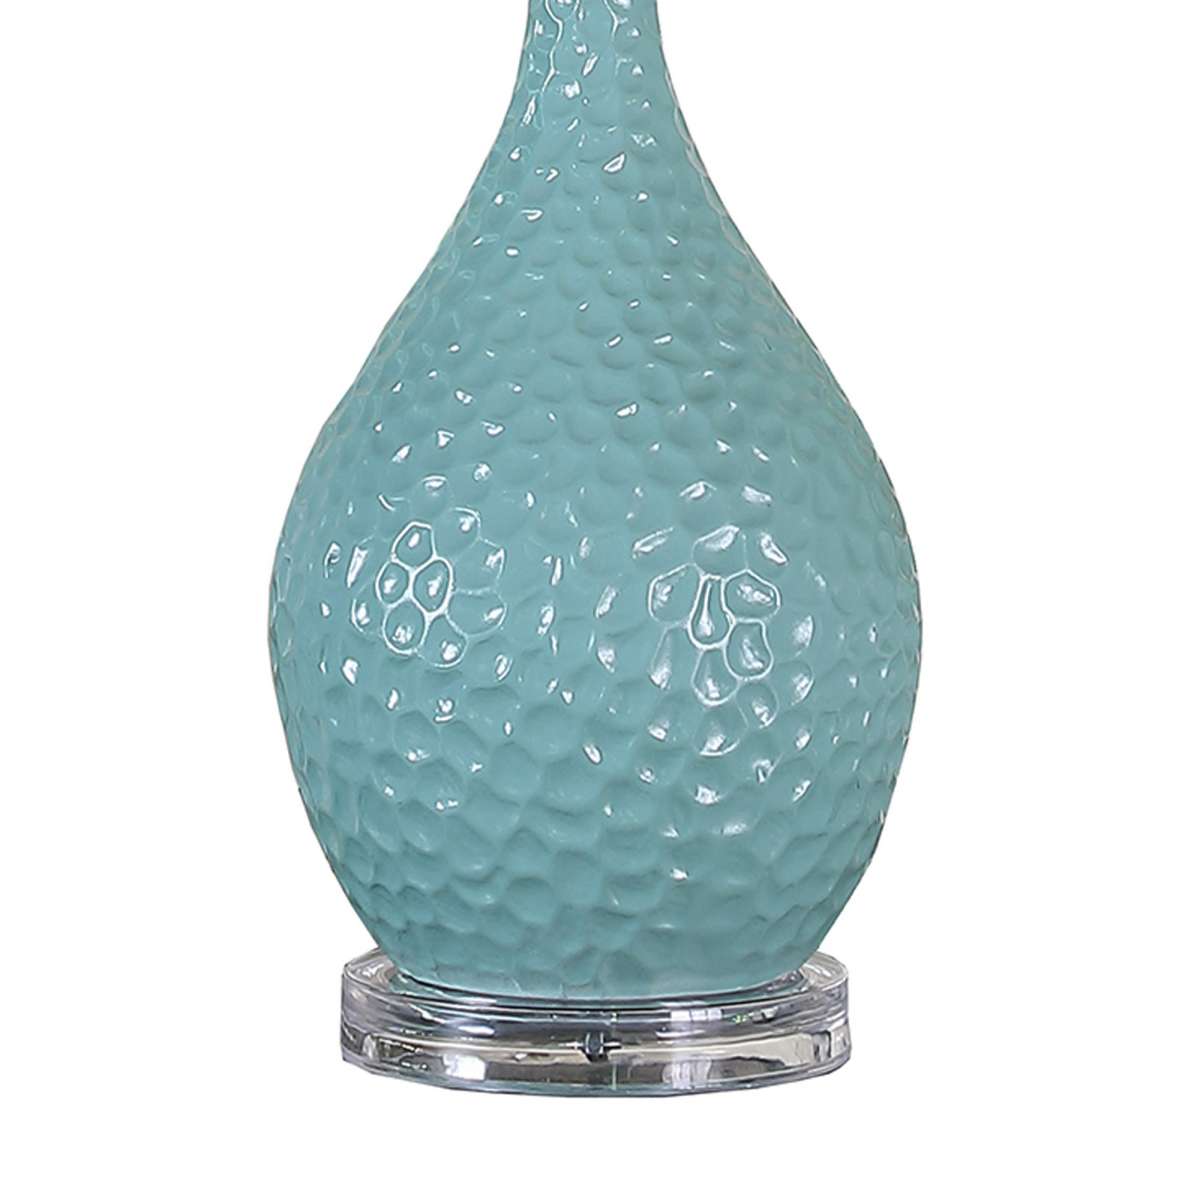 Benzara Pin Bowl Design Metal Table Lamp With Hammered Pattern, Blue By Benzara Table Lamps BM233921